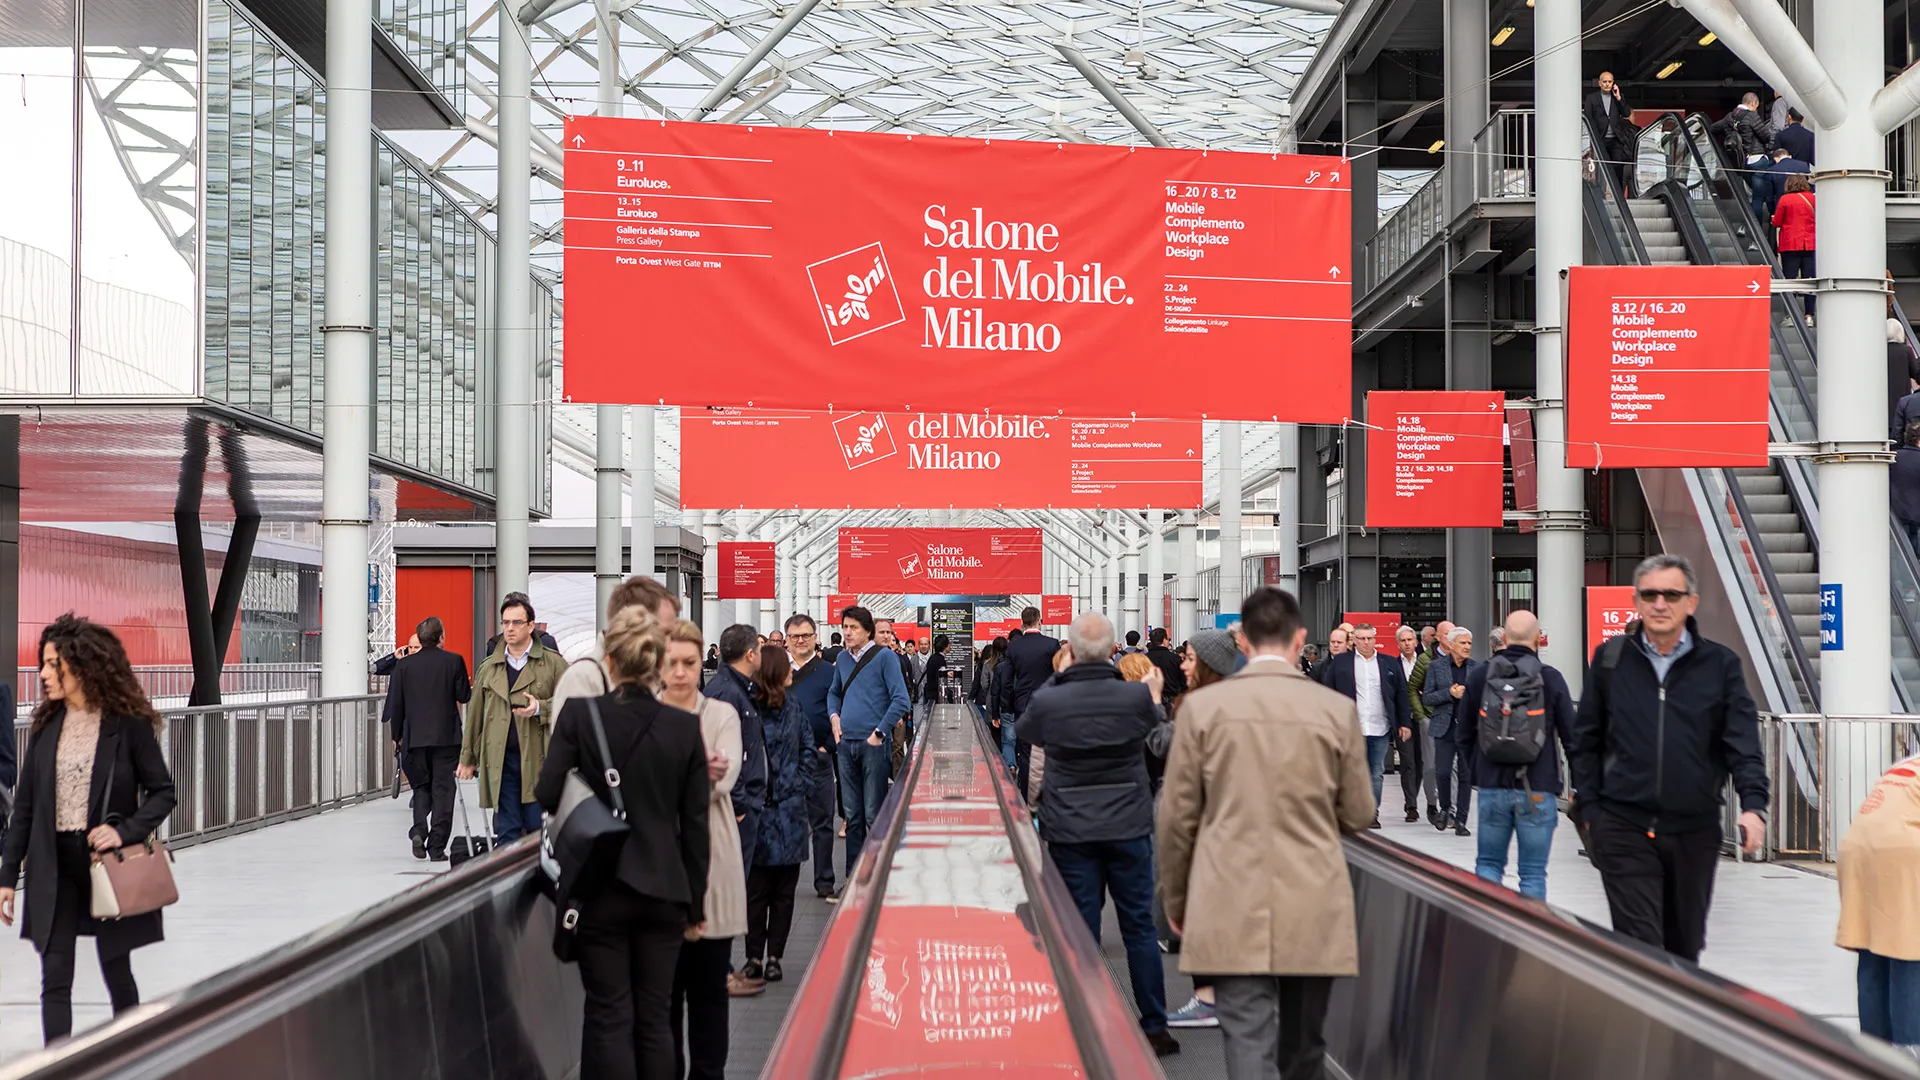 Salone del Mobile 2022: all the information, constantly updated